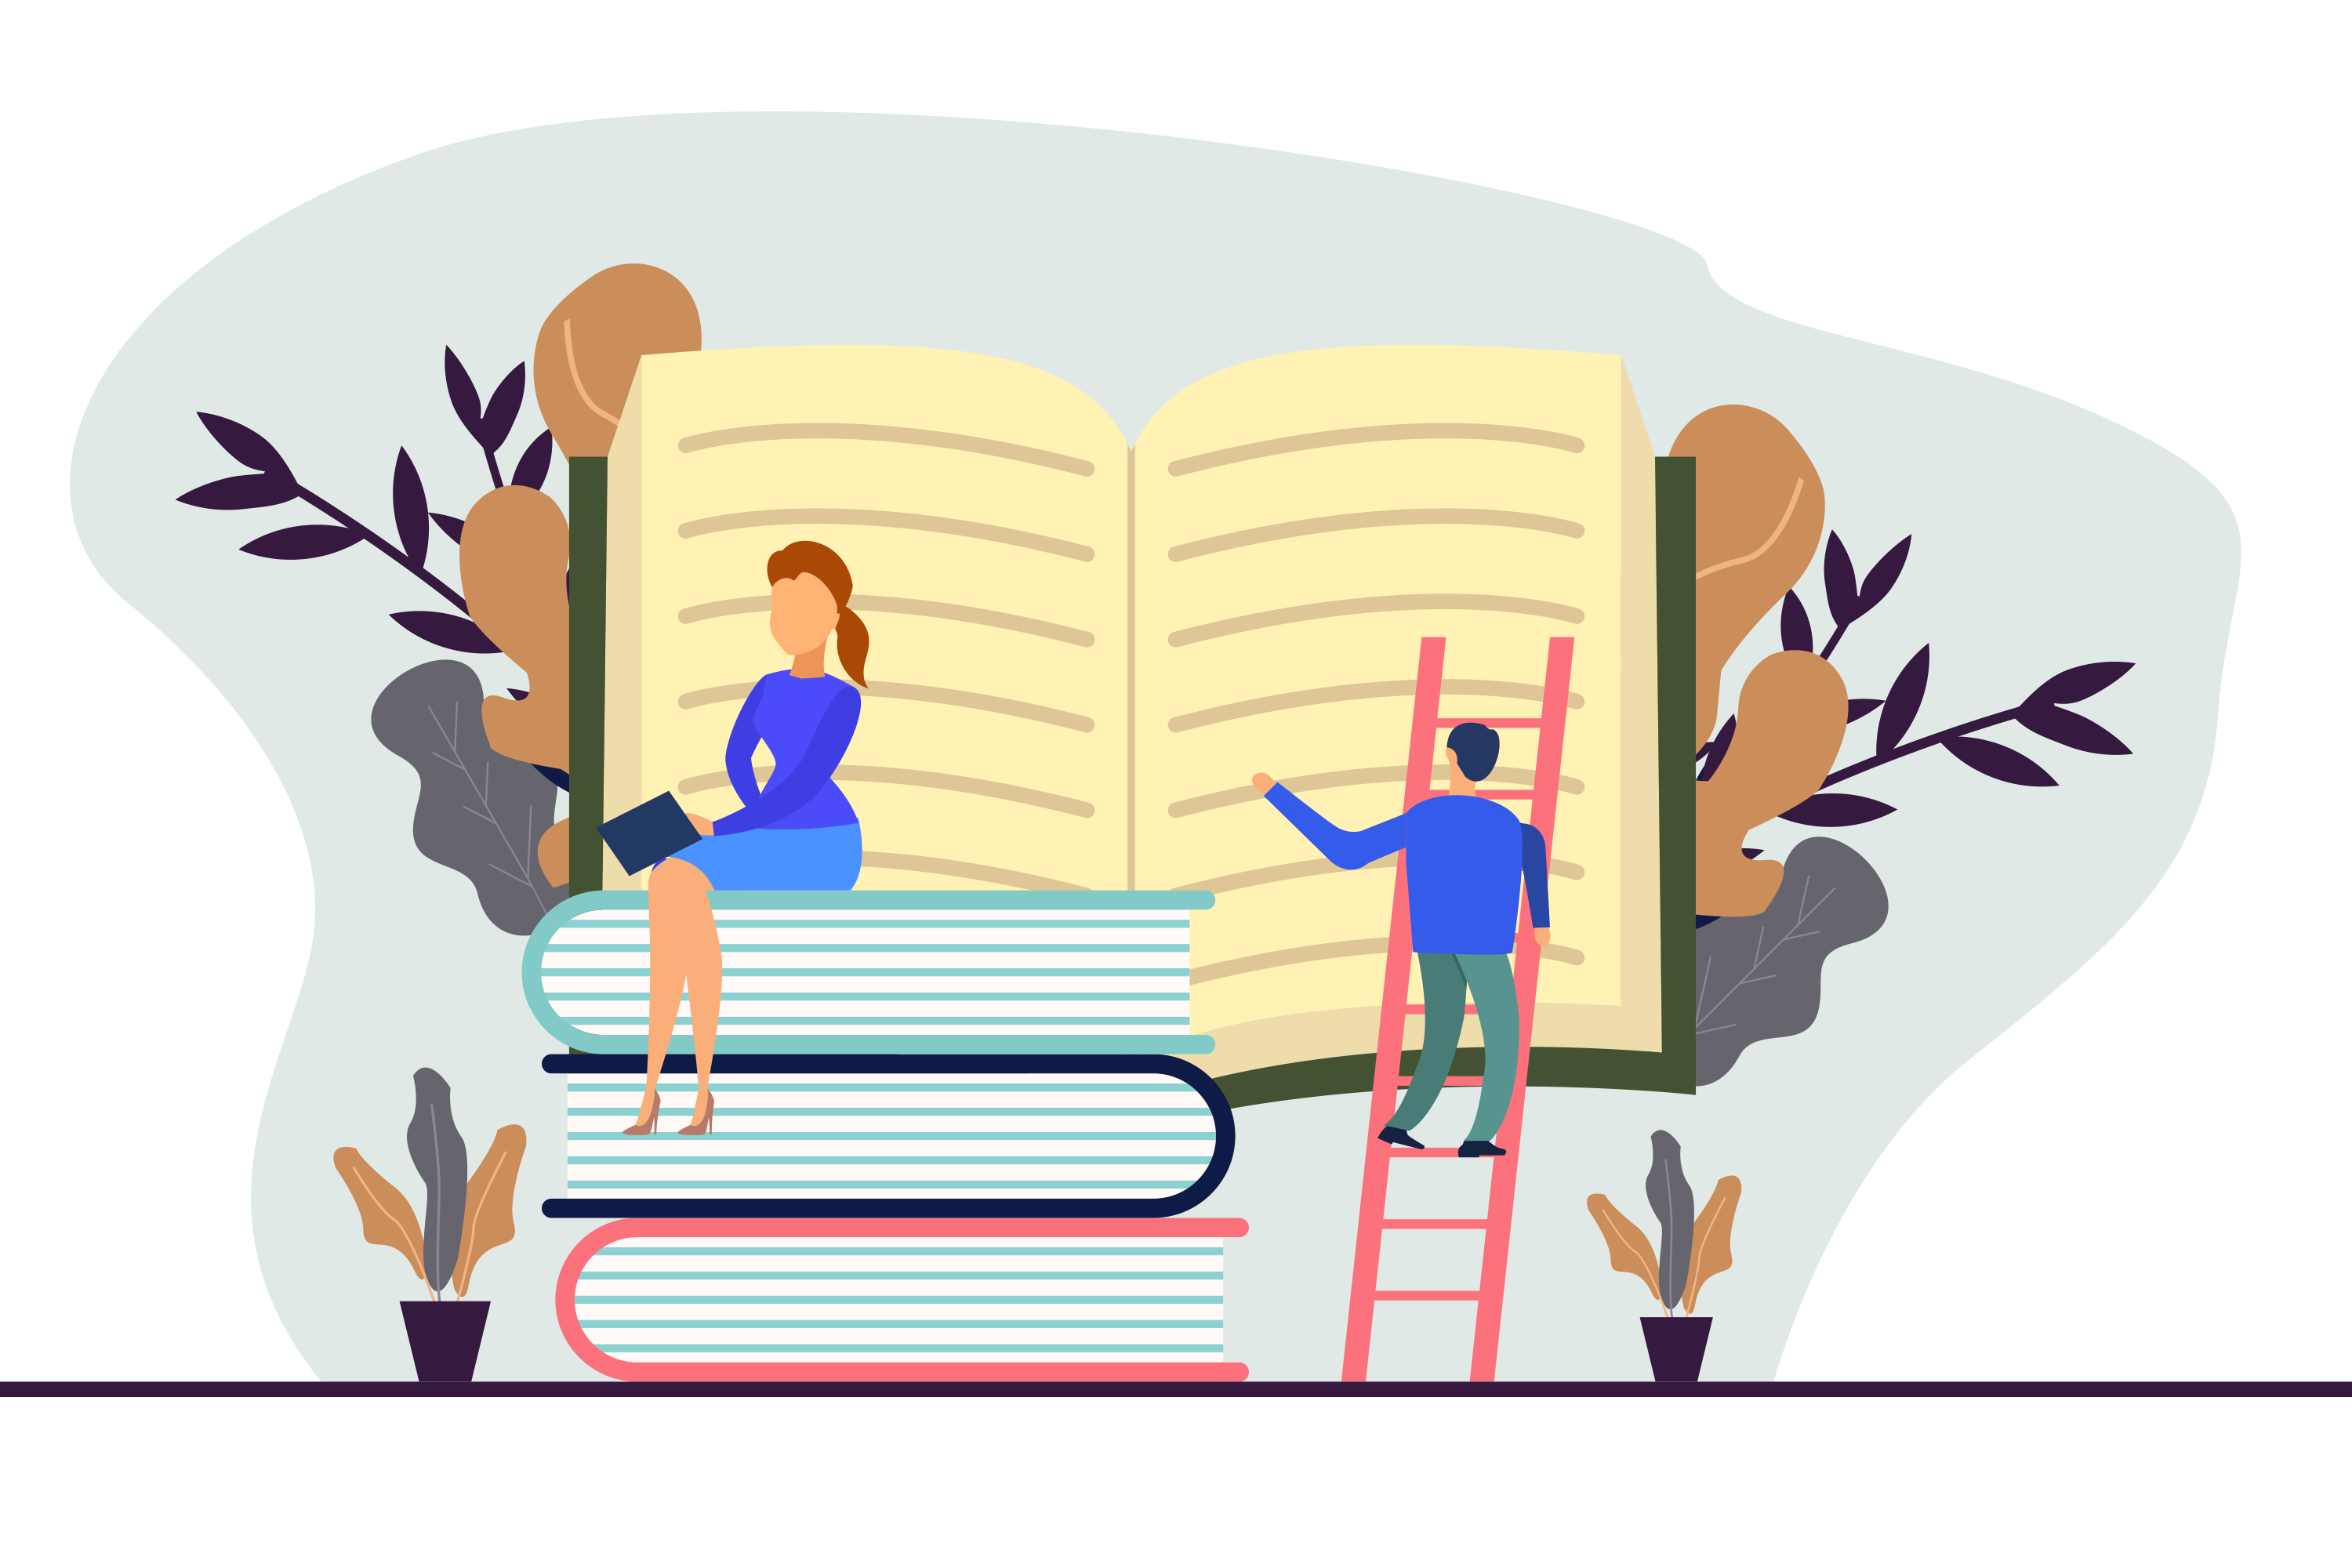 people-interested-hobby-sit-education-information-icon-book-person-young-literature-learn-home-illustration